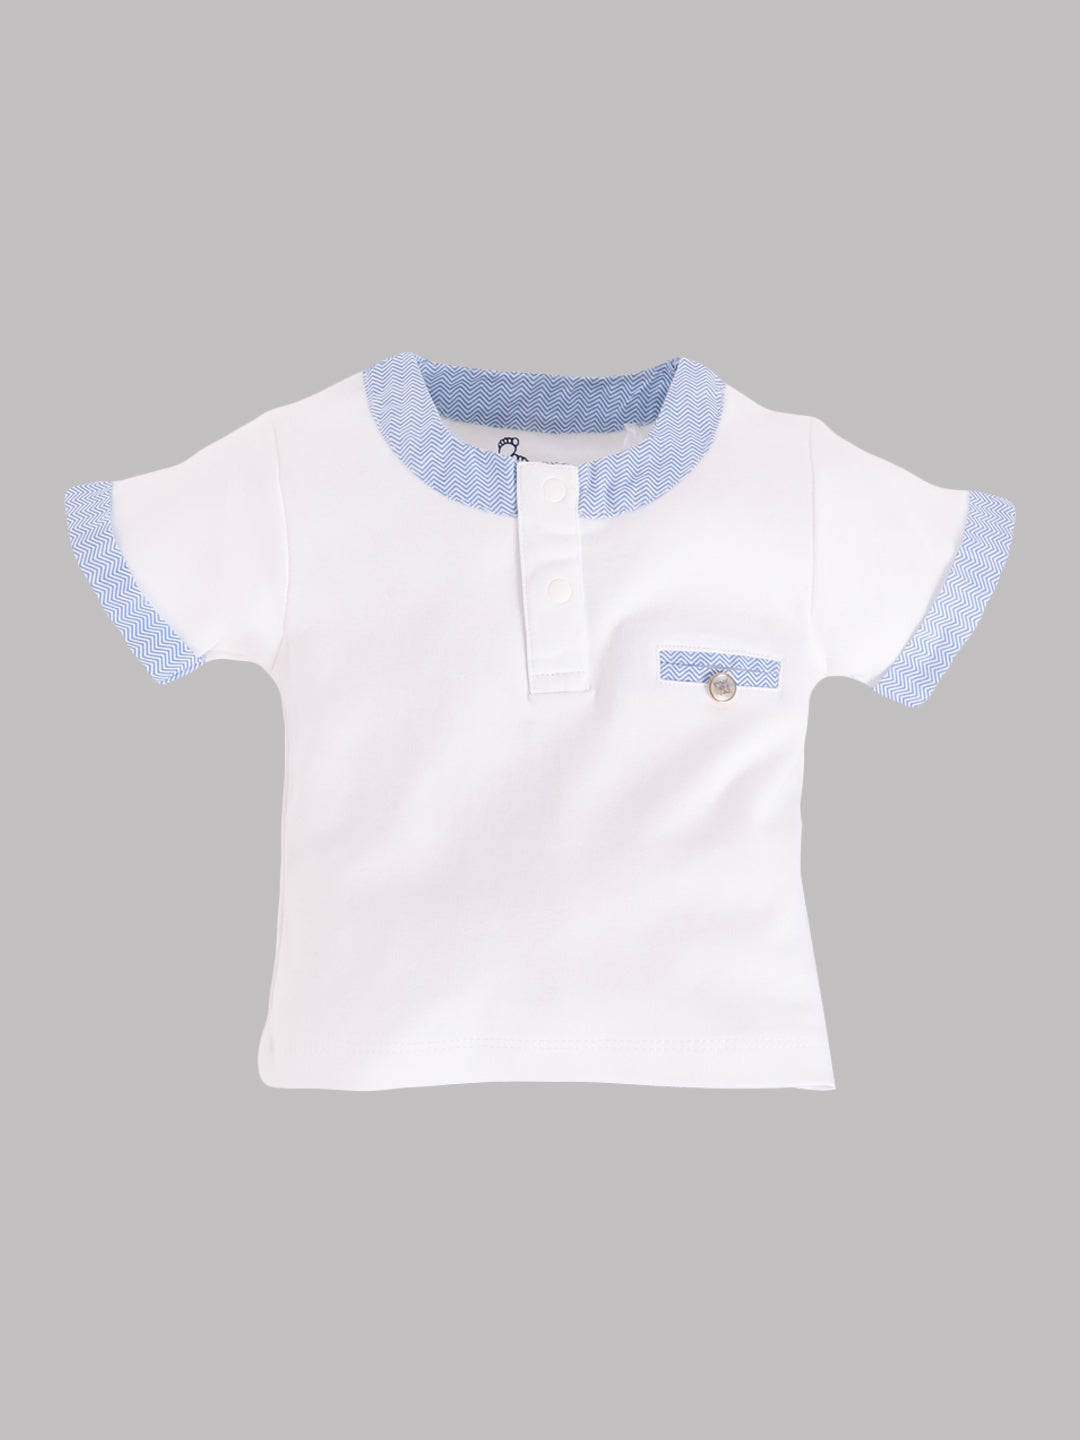 Half T-shirt and Shorts Set for Baby Boys 100% pure cotton-SKY